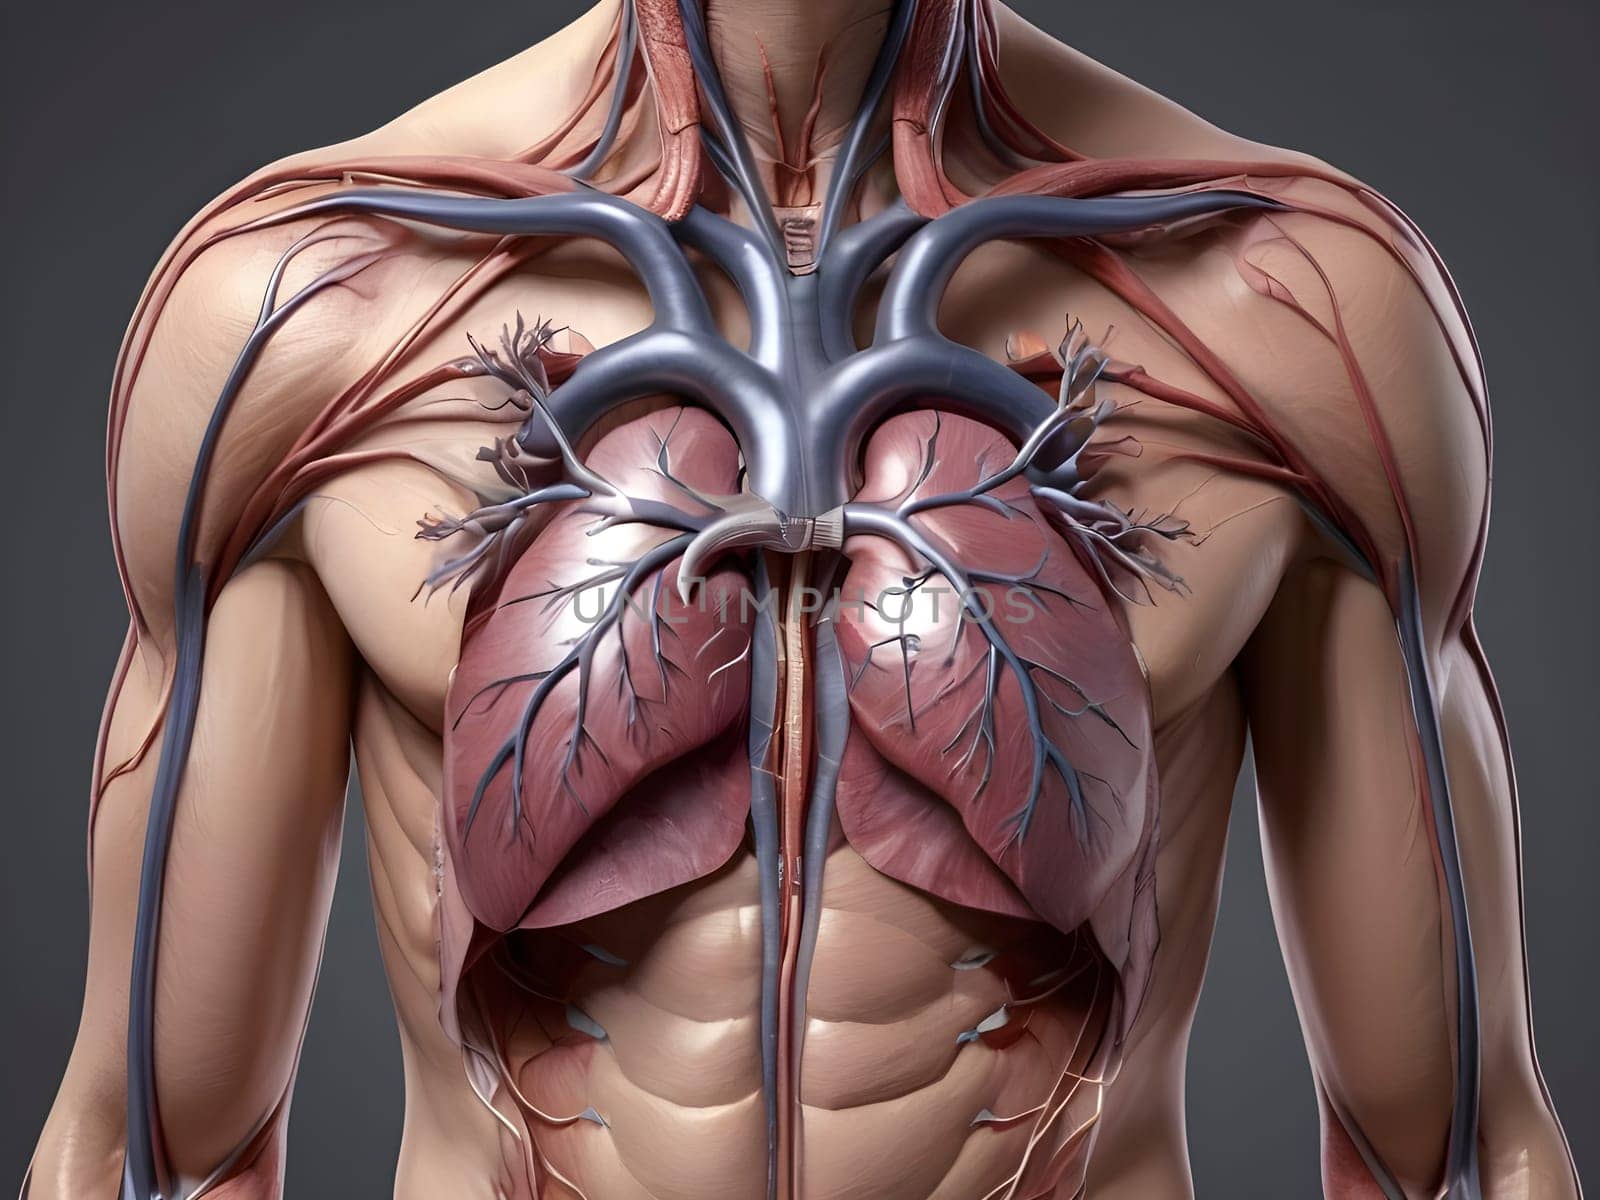 Detailed Illustration of the Human Body, Emphasizing the Transparent Heart.